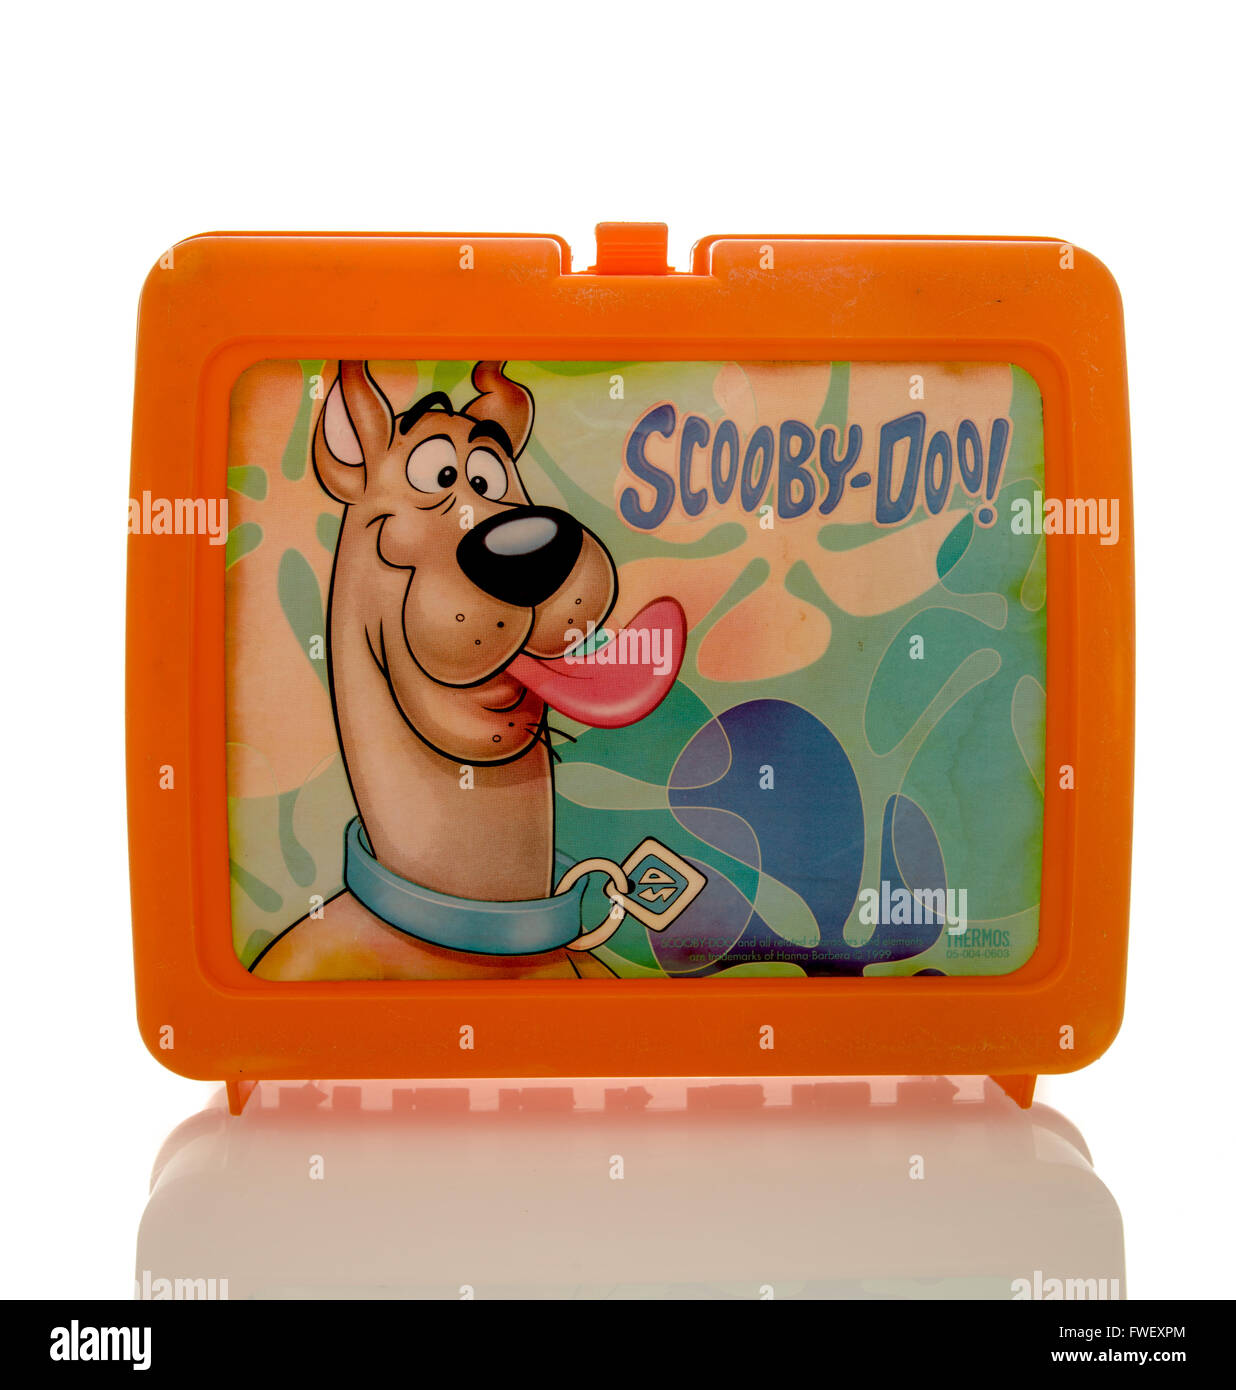 https://c8.alamy.com/comp/FWEXPM/winneconne-wi-3-april-2016-plastic-lunch-box-from-the-1980s-featuring-FWEXPM.jpg